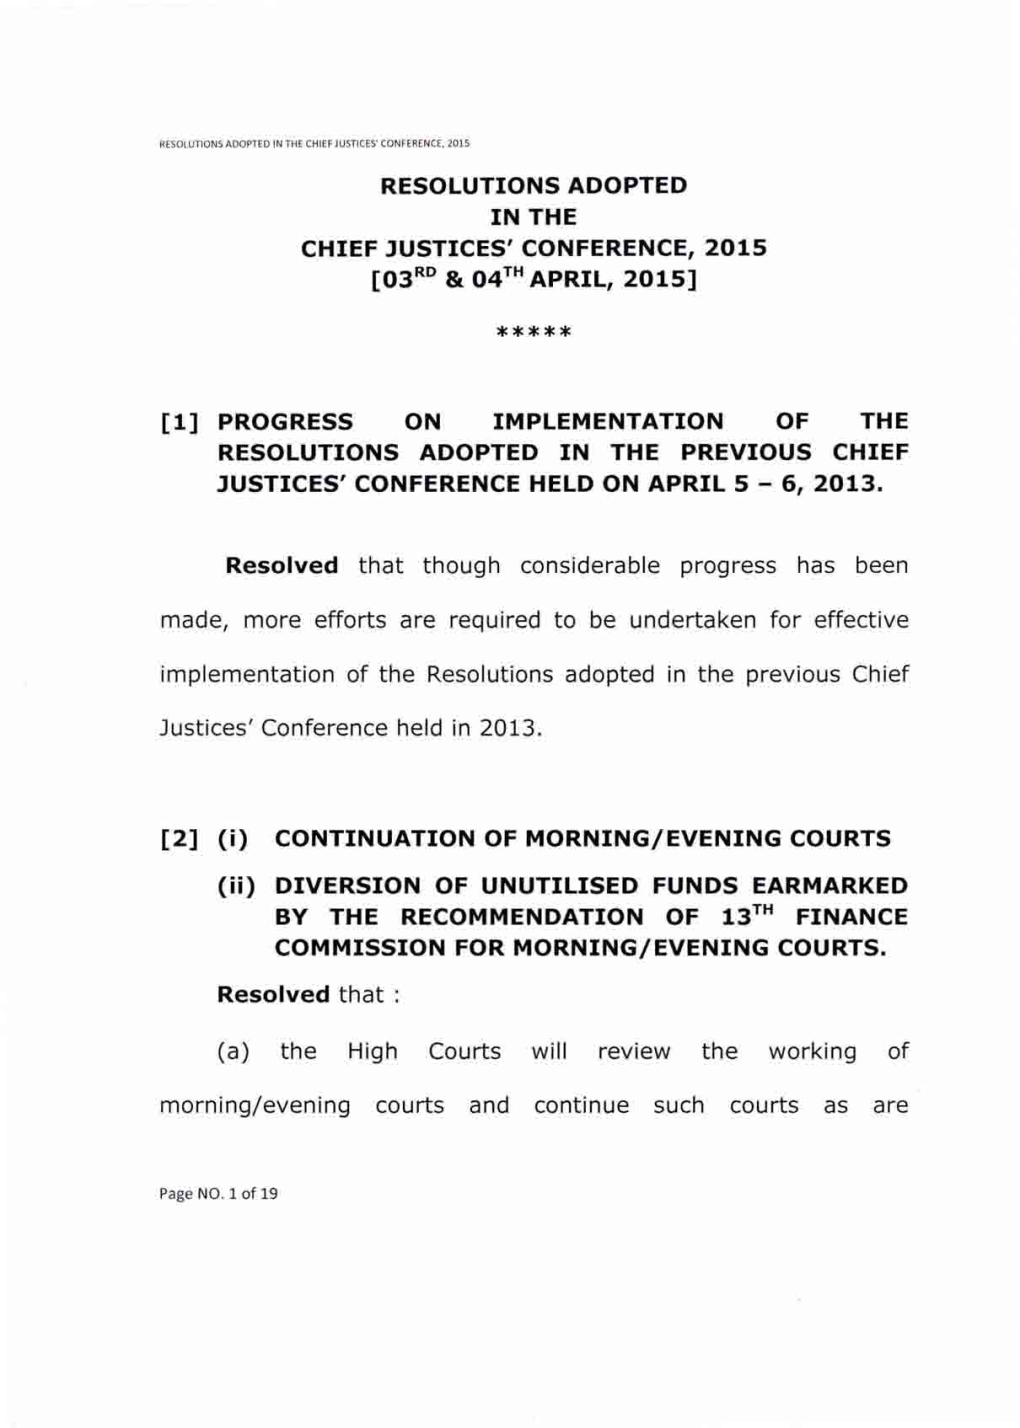 Resolutions Adopted in the Chief Justices' Conference, 2015 [03Rd & 04Th April, 2015]